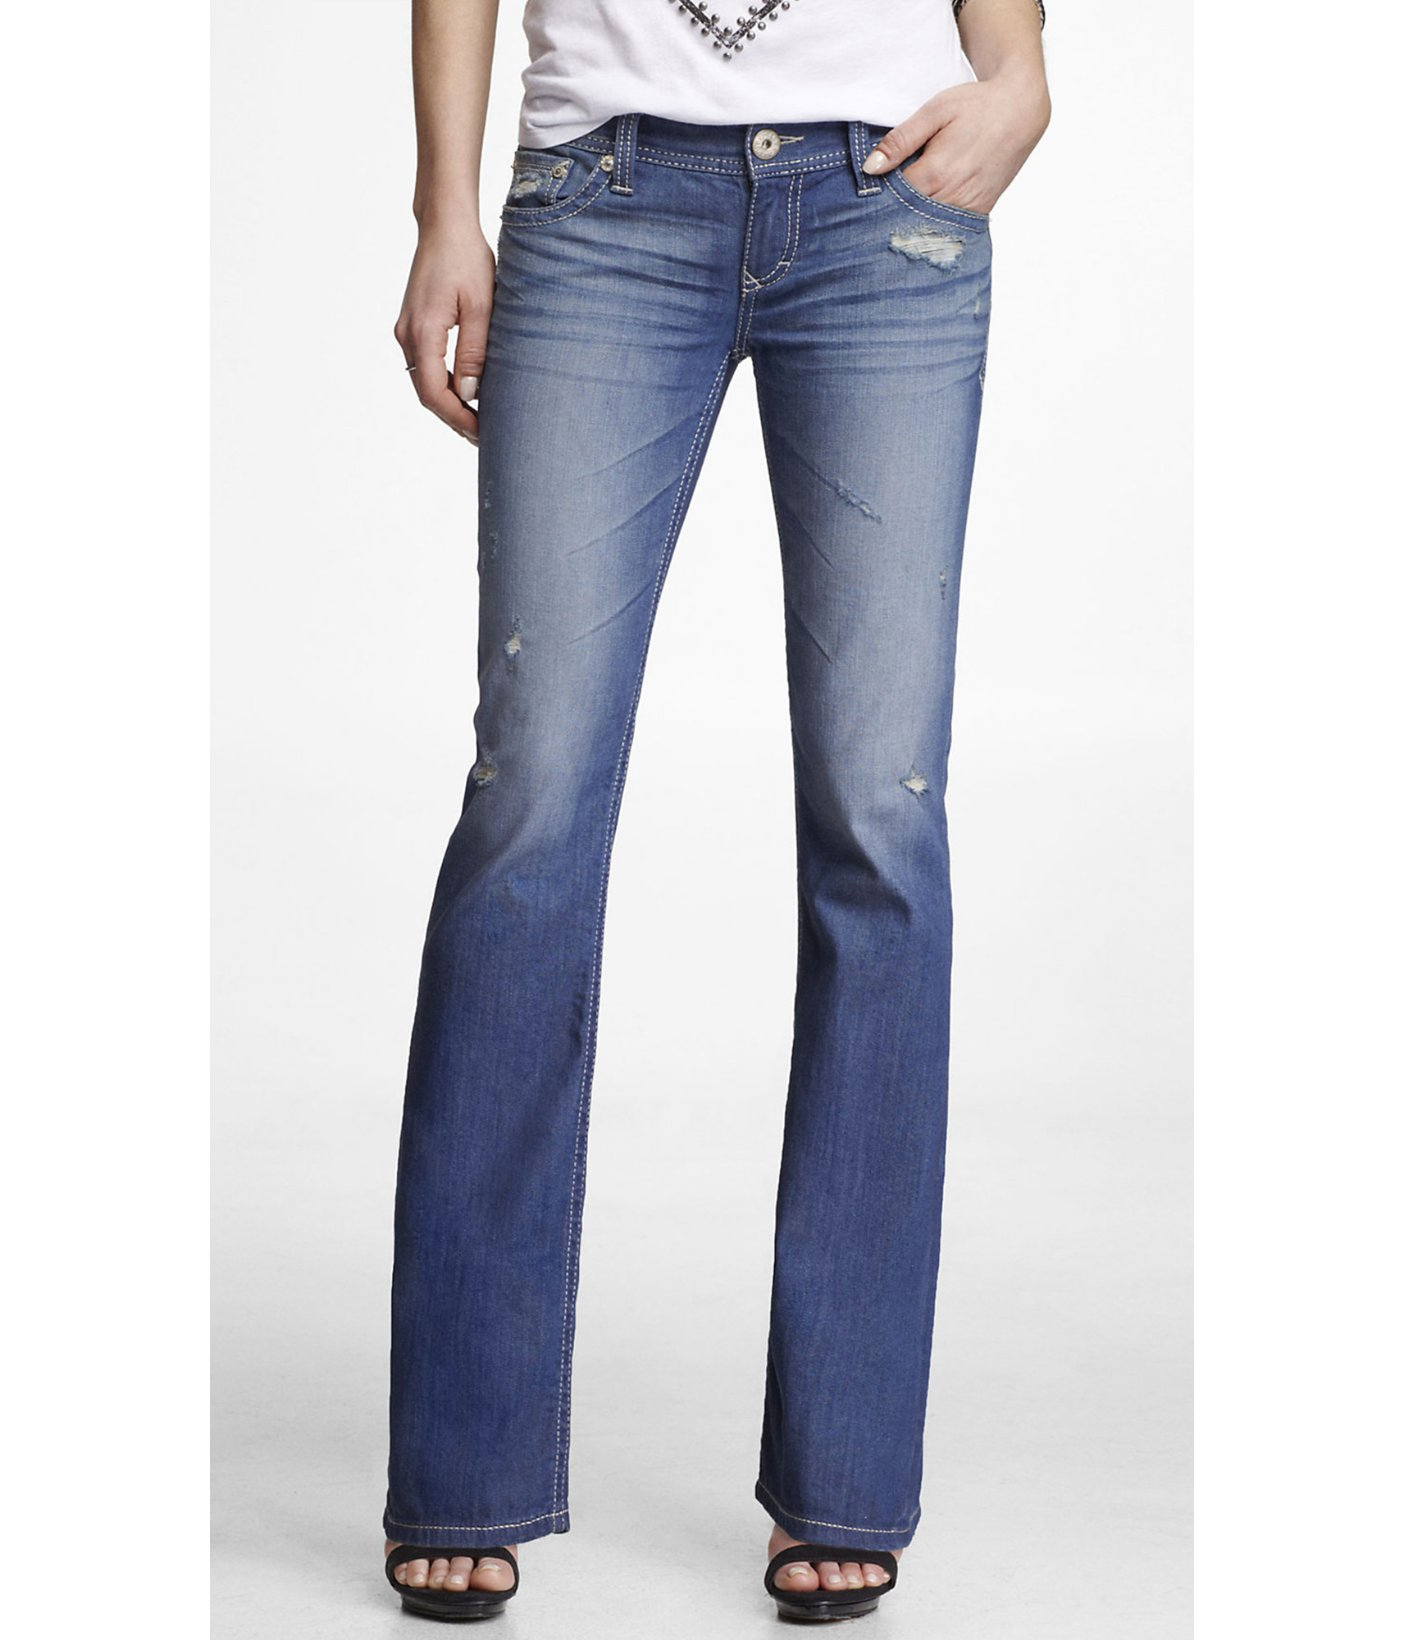 jeans ultra low rise